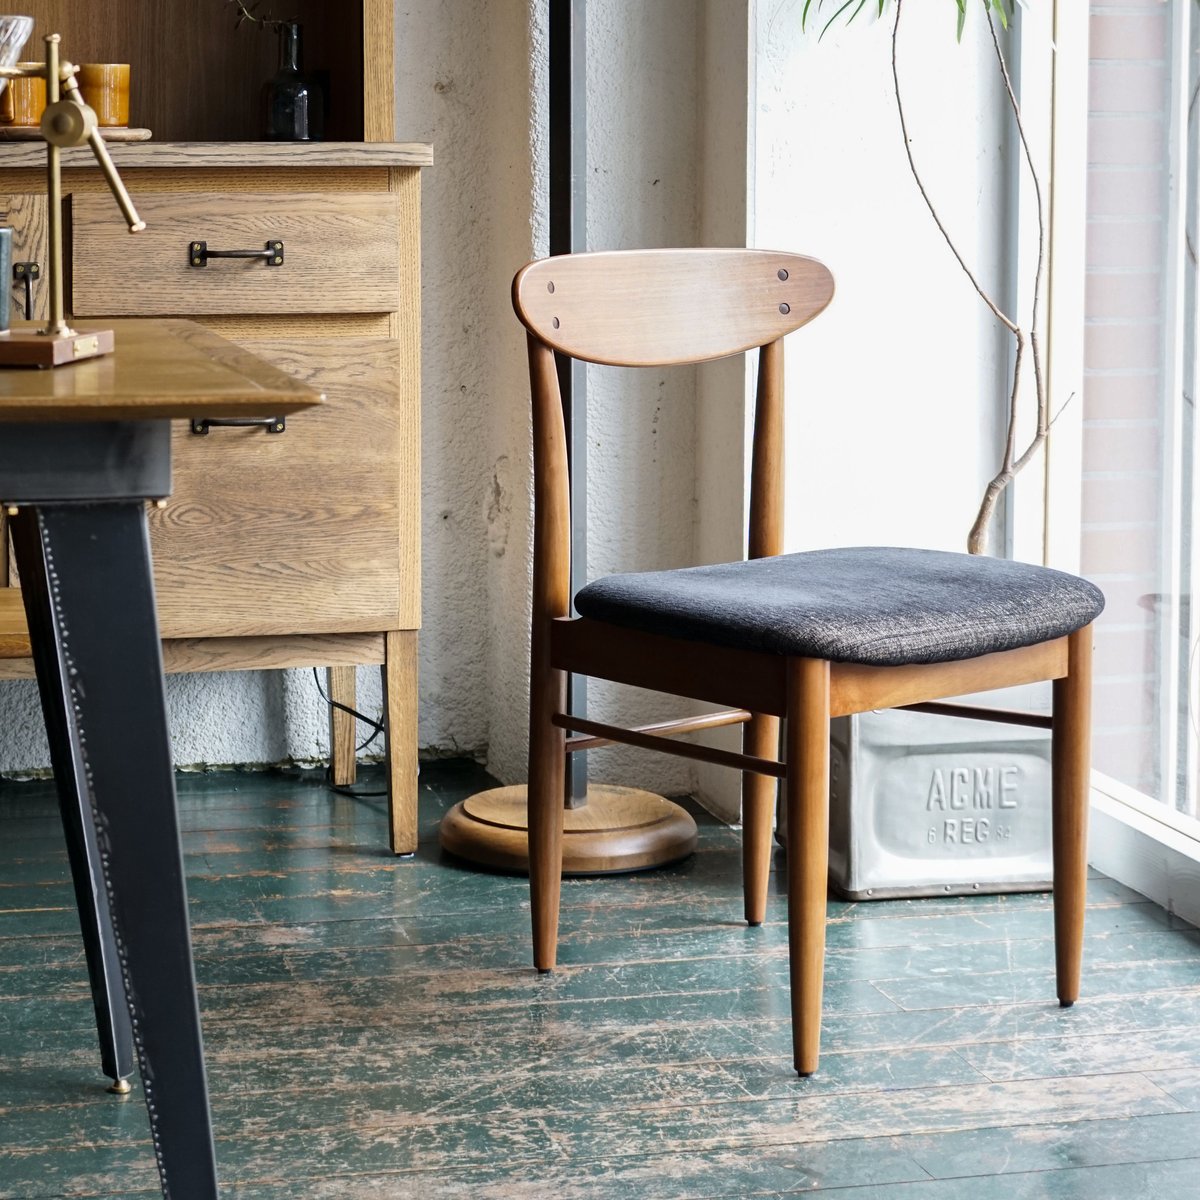 TRESTLES CHAIR / ACME furniture | GENERAL STORE...